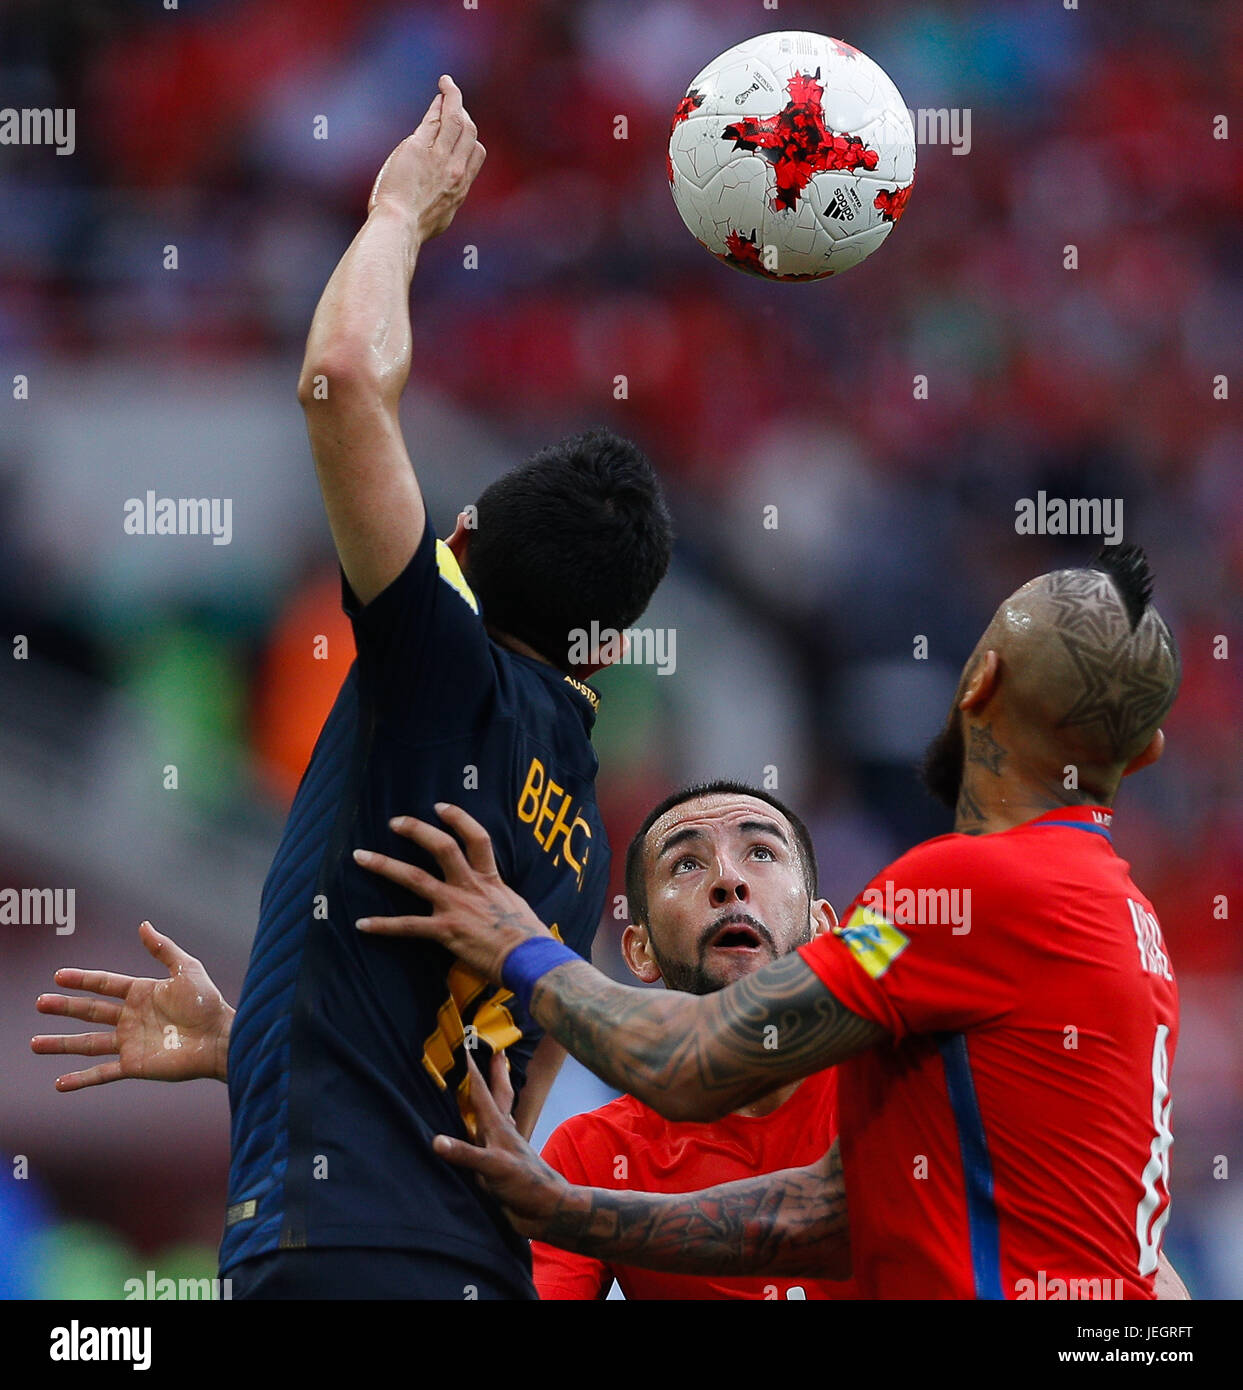 Moscow, Russia. 25th Jun, 2017. ISLA Mauricio of Chile observes ball during Chile-Australia match valid for the third round of the Confederations Cup 2017, this Sunday (25), held in the Spartak Stadium (Otkrytie Arena) in Moscow, Russia. Credit: Foto Arena LTDA/Alamy Live News Stock Photo